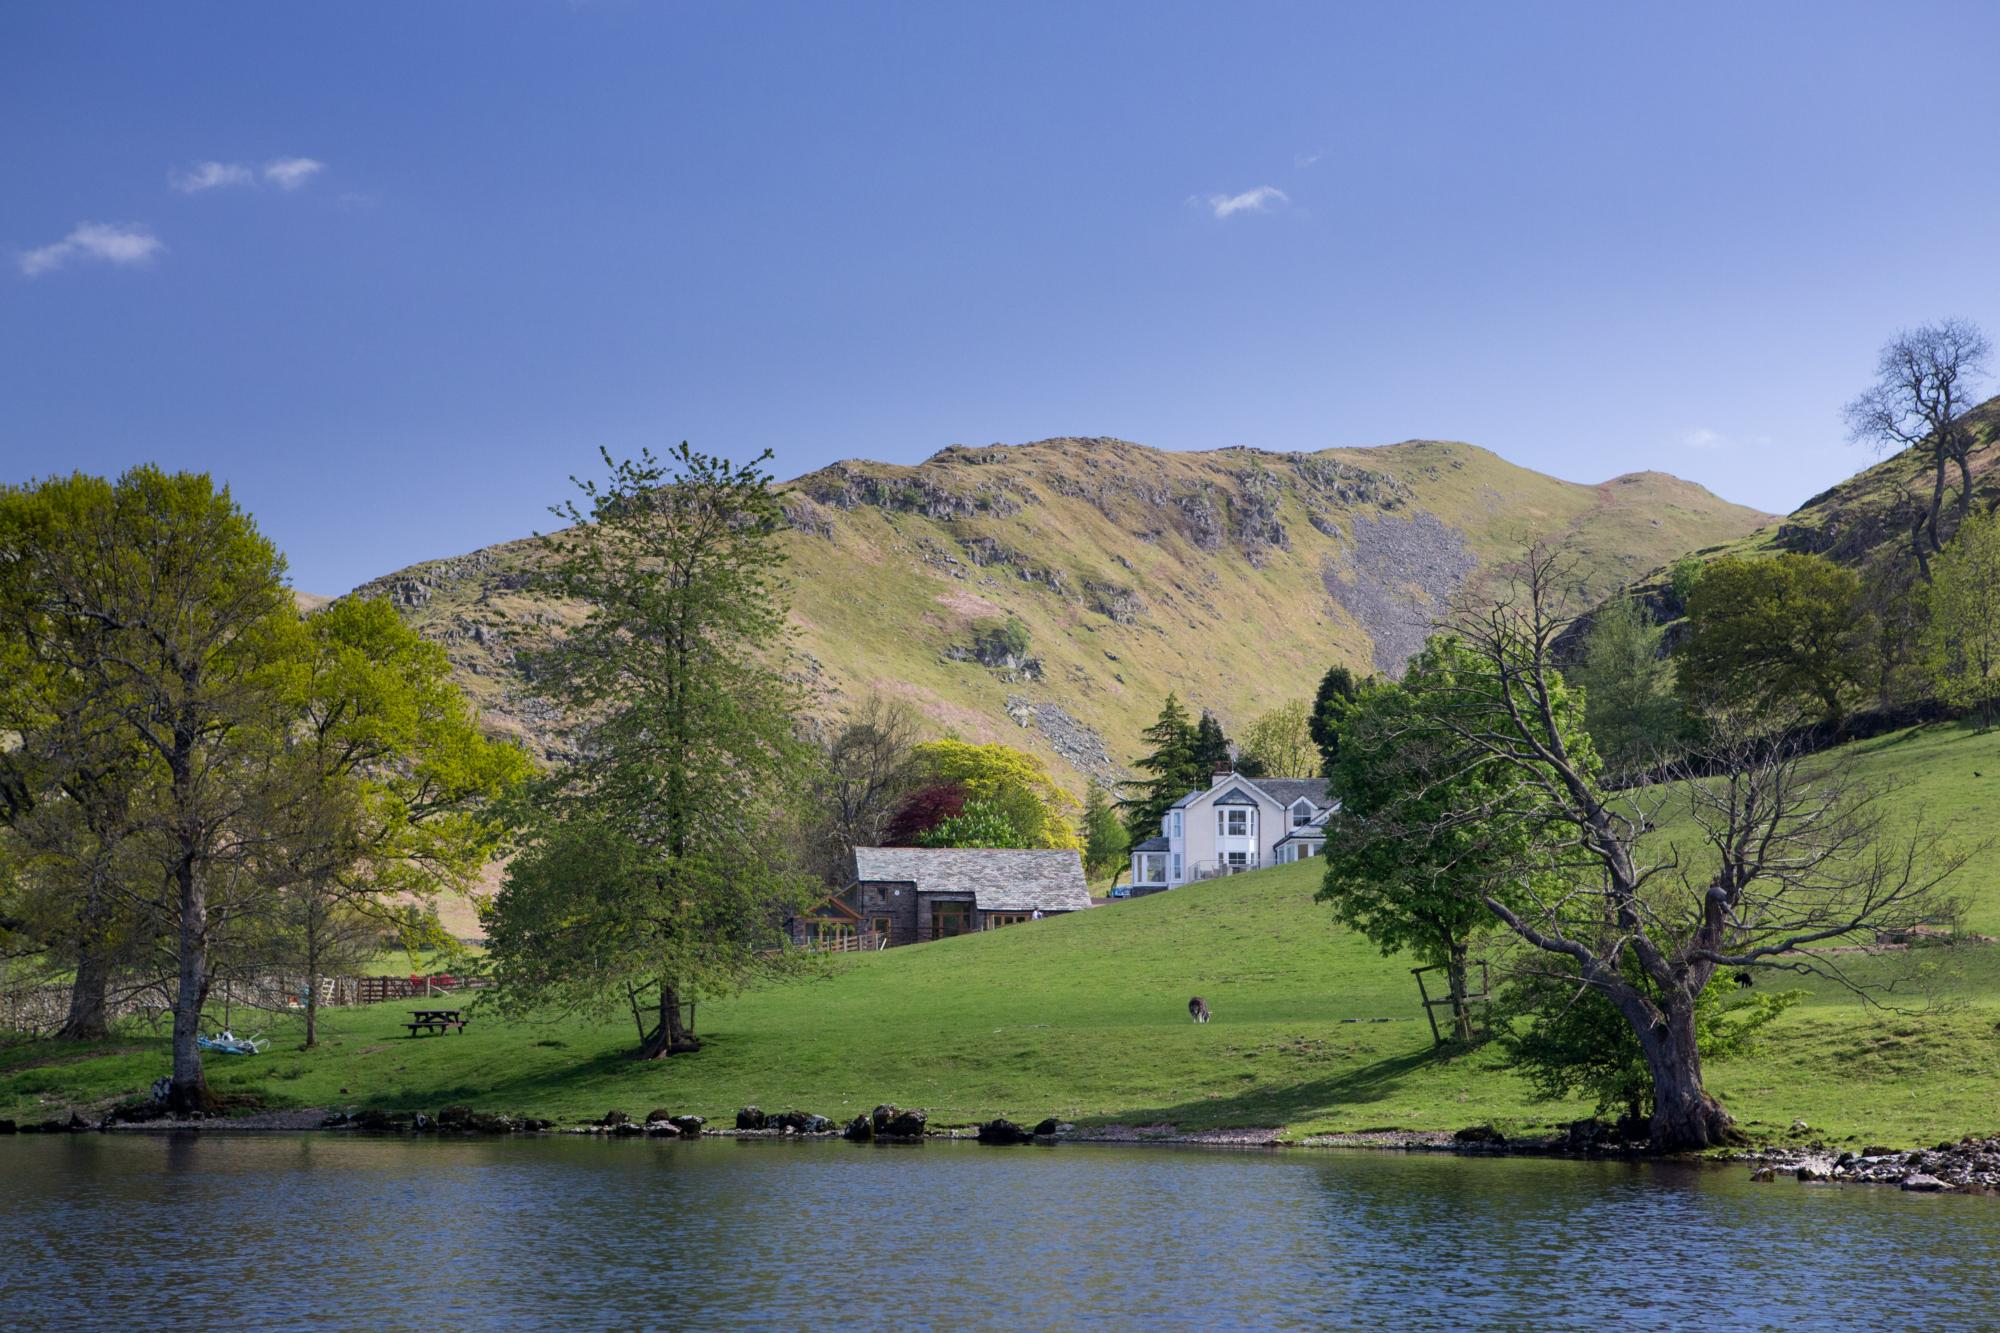 Contemporary UK hotels, B&Bs, holiday cottages and glamping - hot off the press!